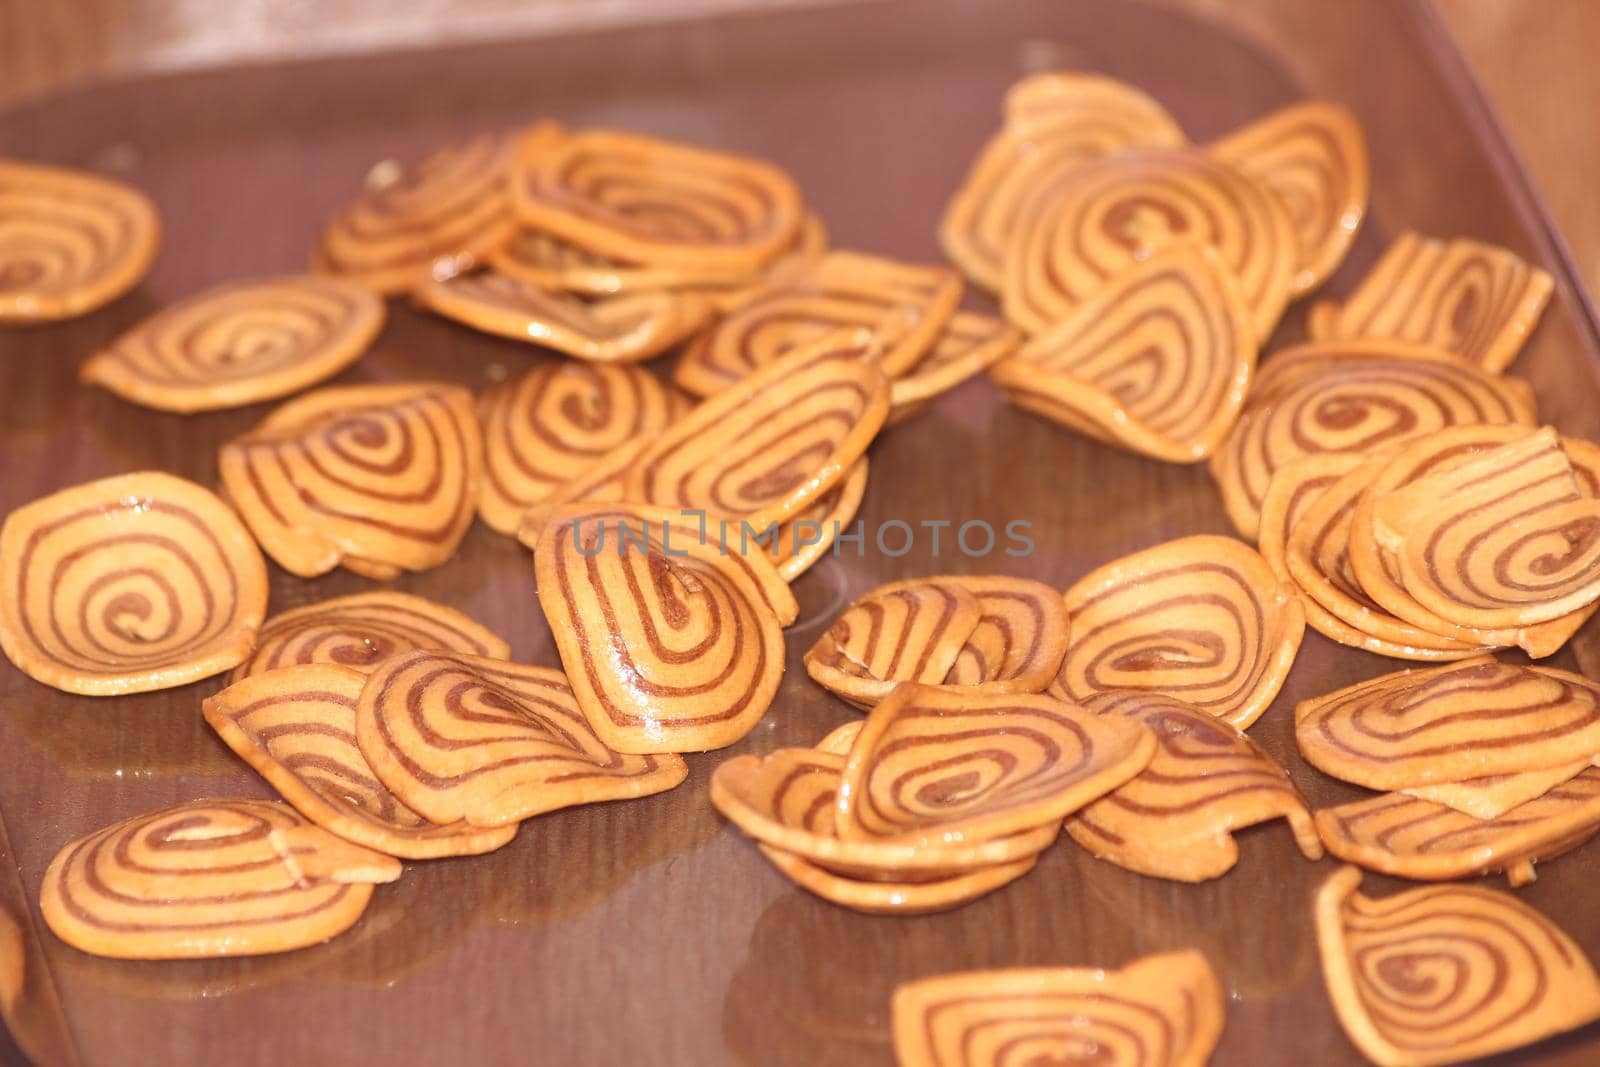 Closeup view with selective focus of a large number of round cookies by Photochowk